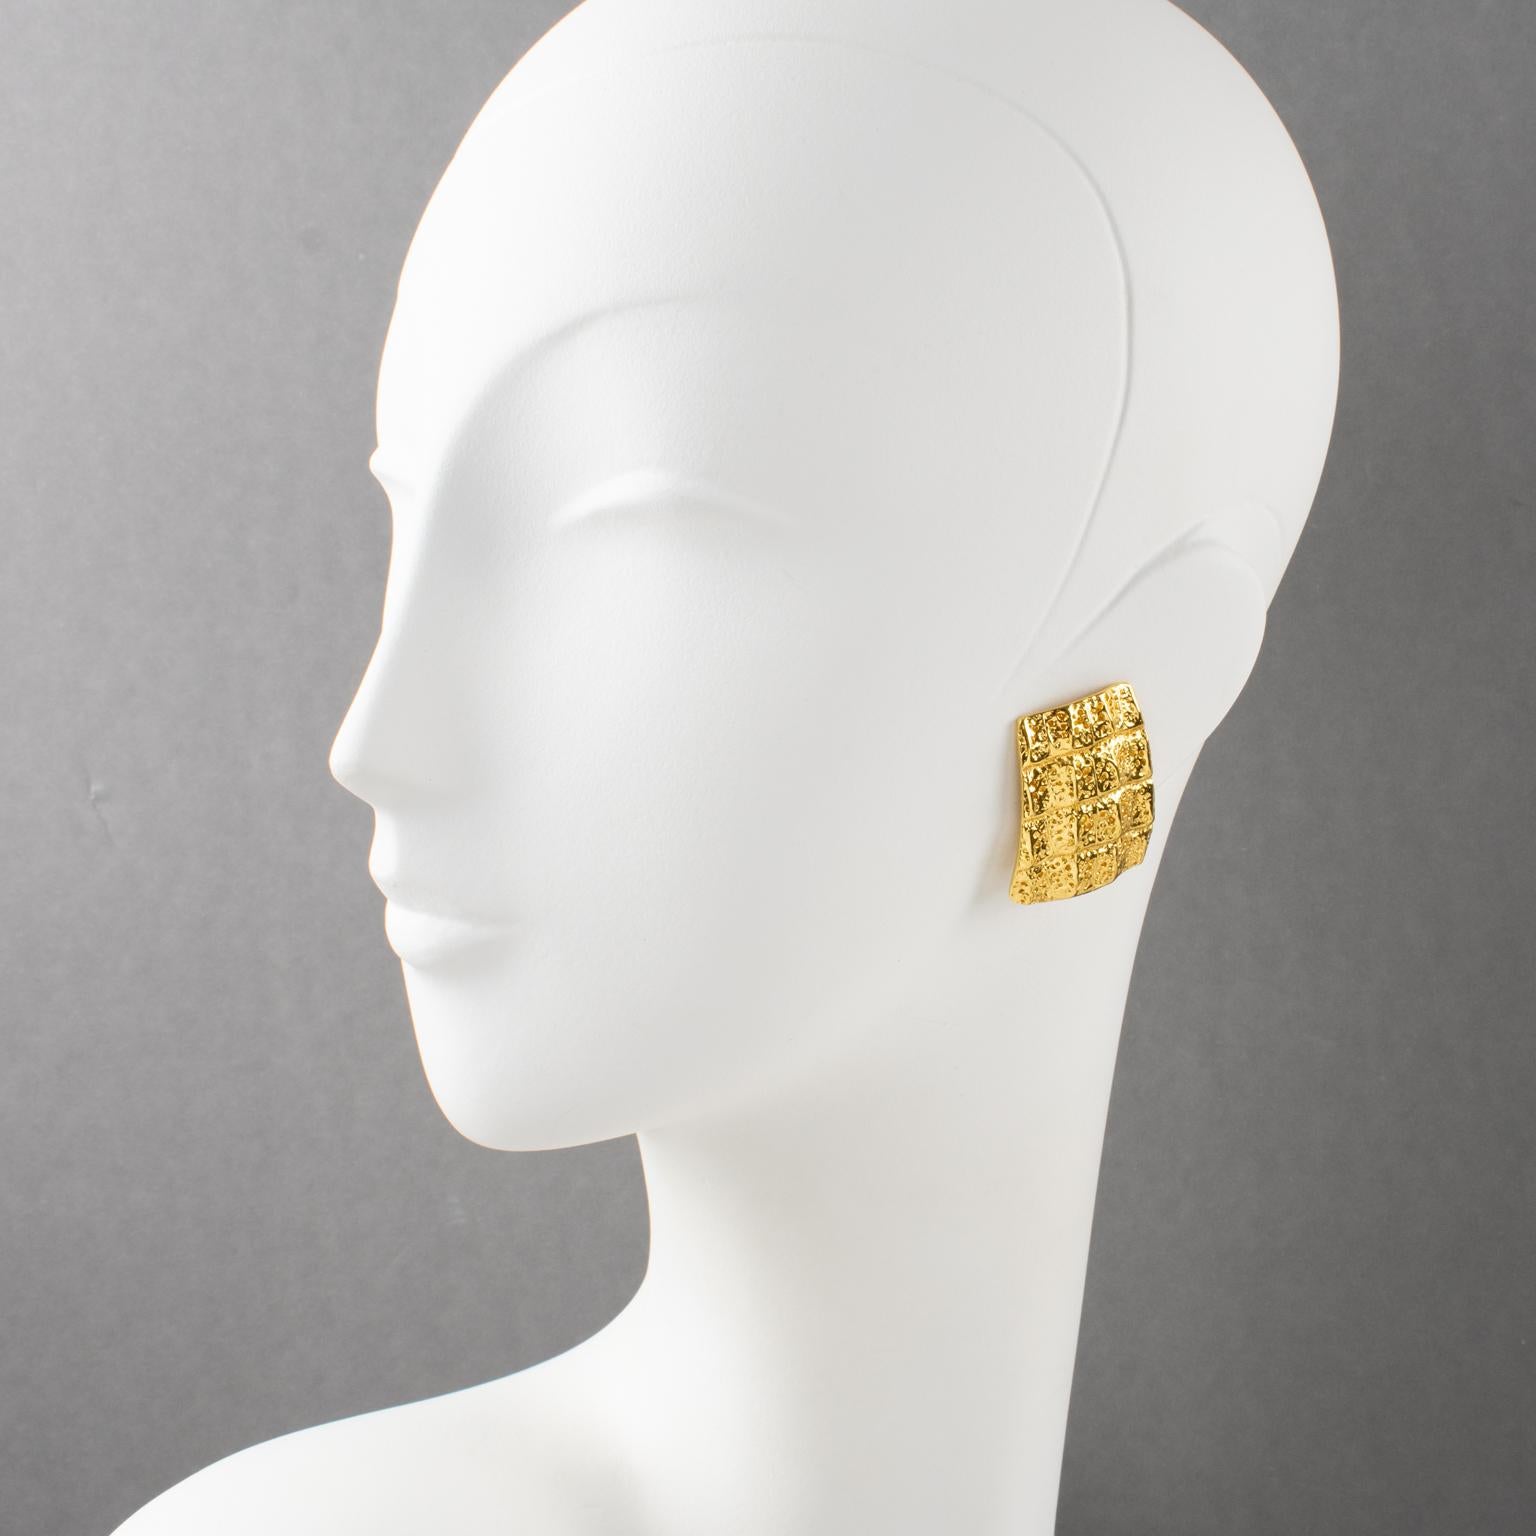 Yves Saint Laurent YSL Paris designed these elegant clip-on earrings in the 1980s. The pieces feature a dimensional geometric shape with gilt metal, all textured with a crocodile embossed pattern. The earrings are signed with the 